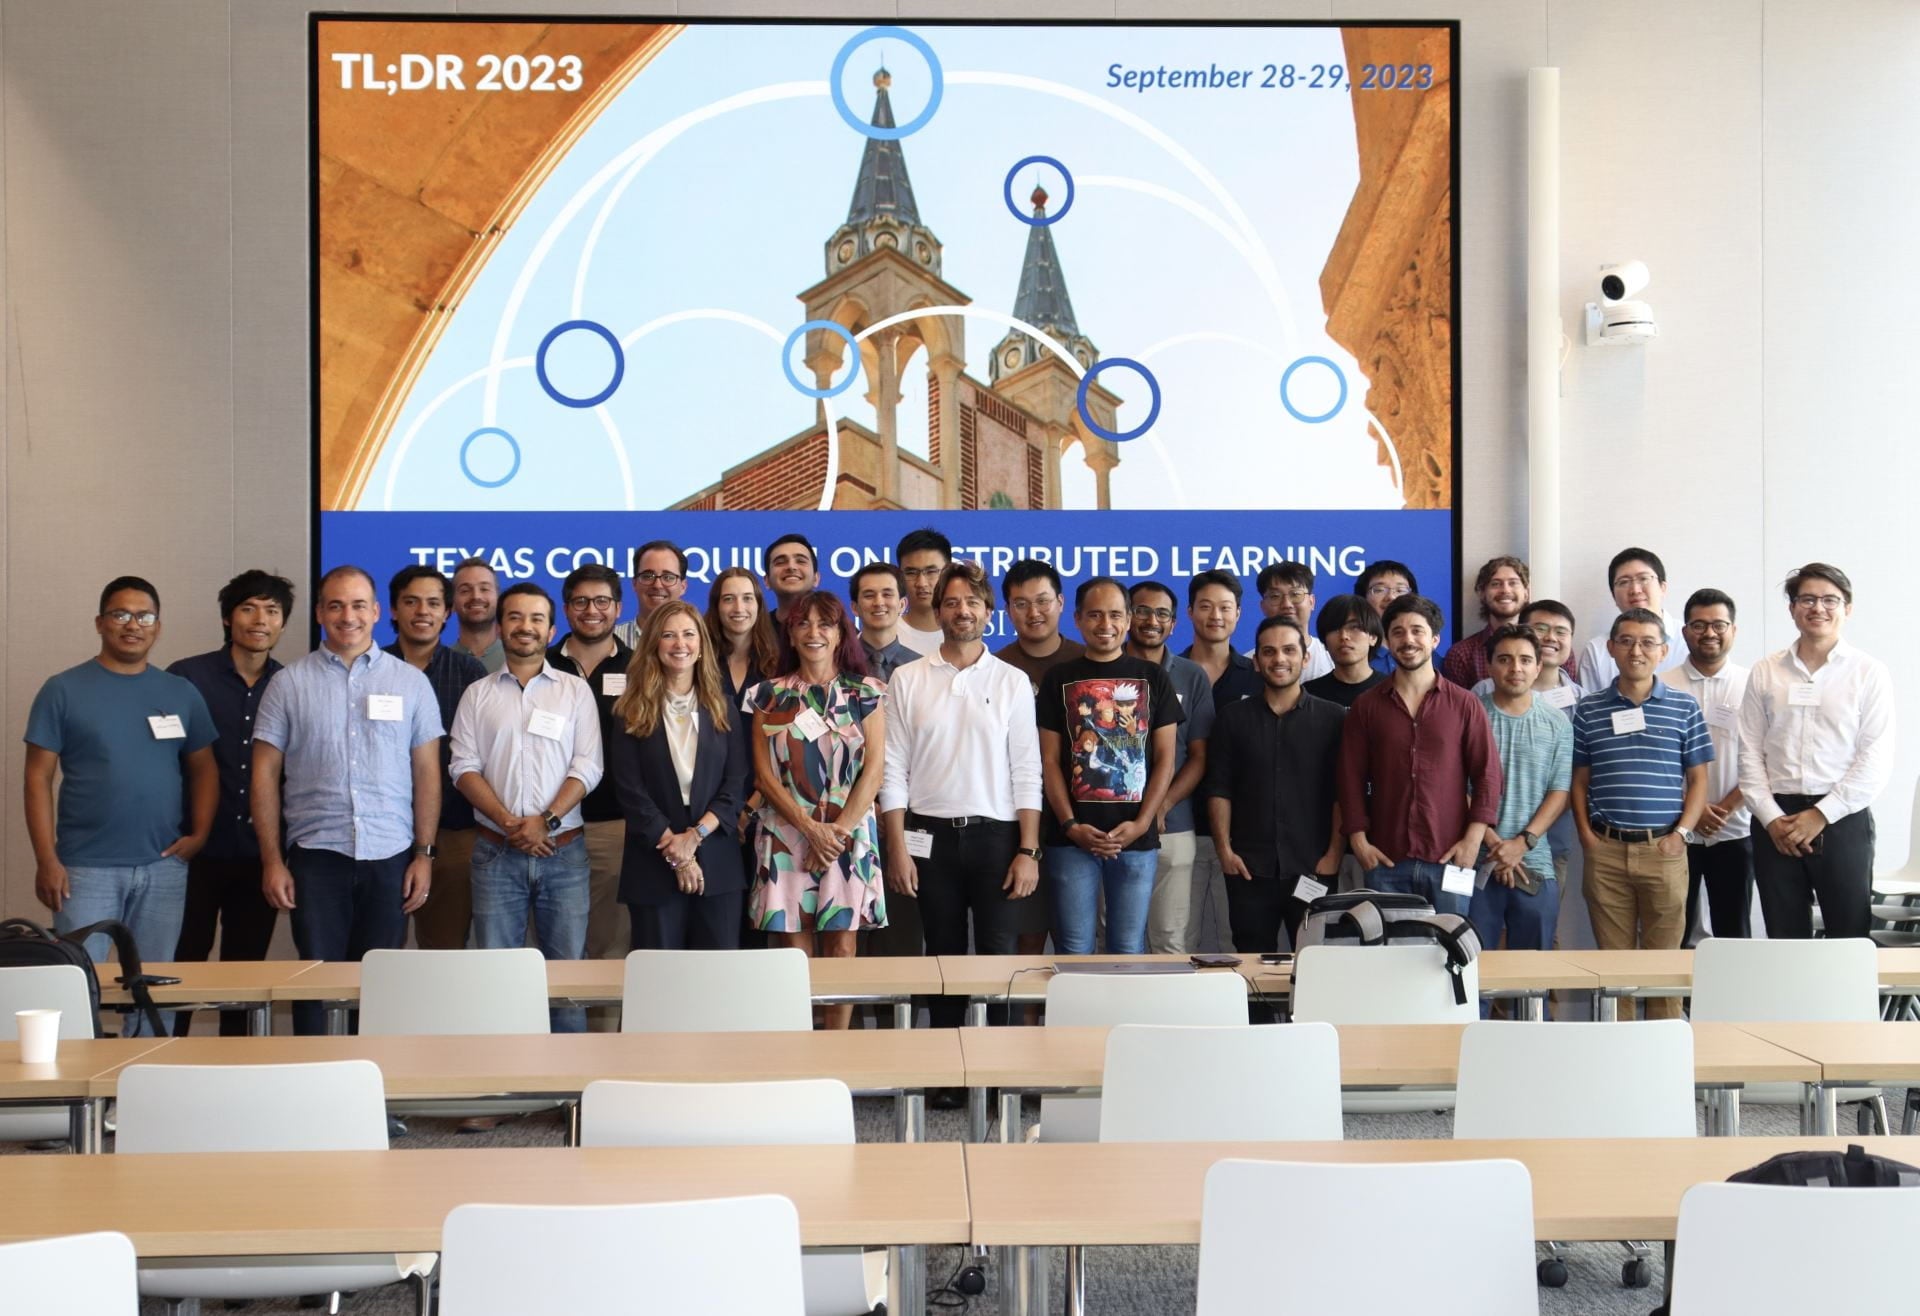 Participants in the Texas Colloquium on Distributed Learning held at Rice discussed challenges and opportunities in distributed computing and large-scale machine learning. (Photo courtesy of Michael Busch/Rice University)